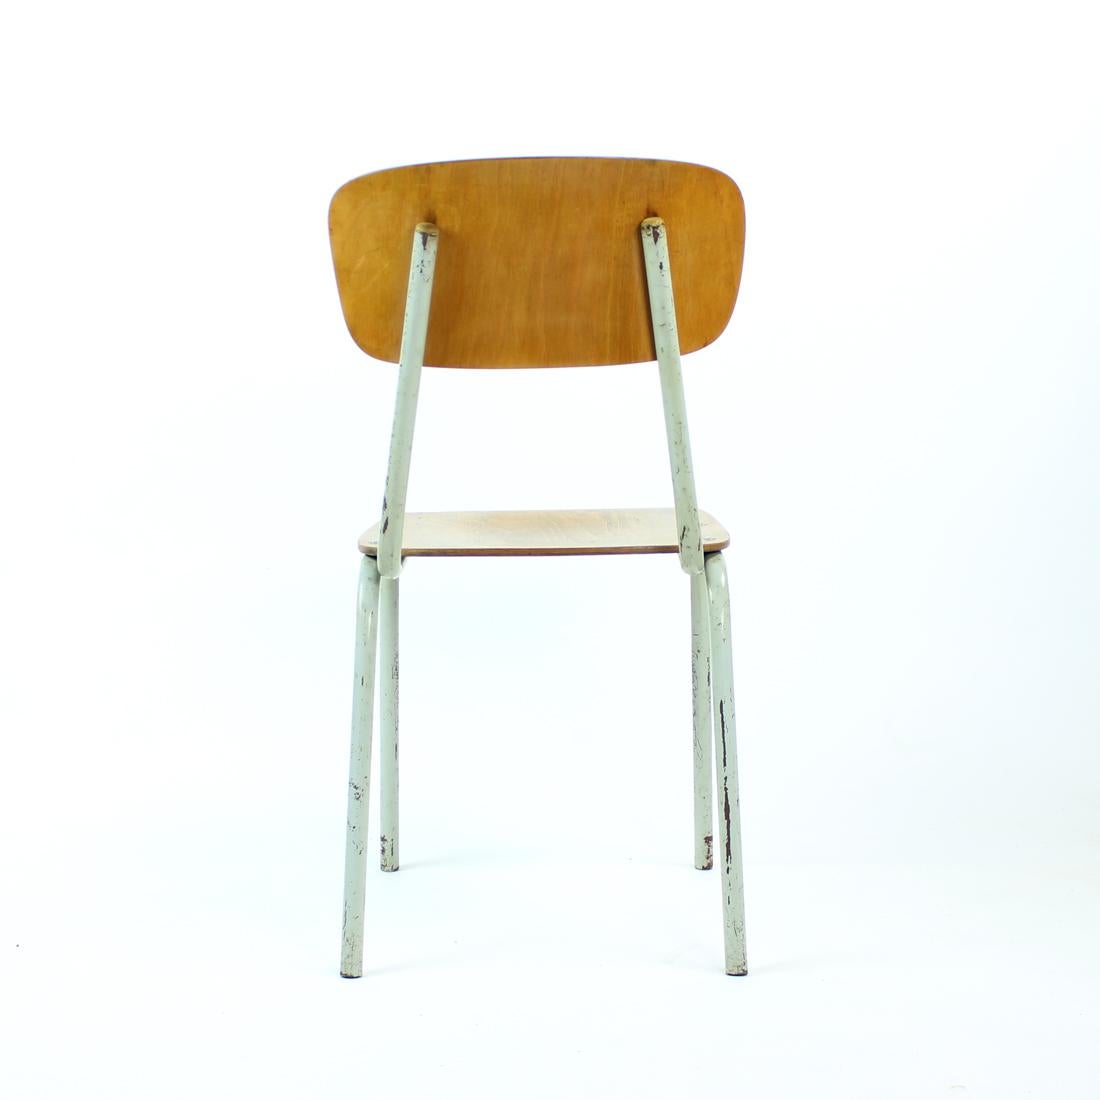 School Chair In Metal And Plywood, Kovona, Czechoslovakia 1960s For Sale 2